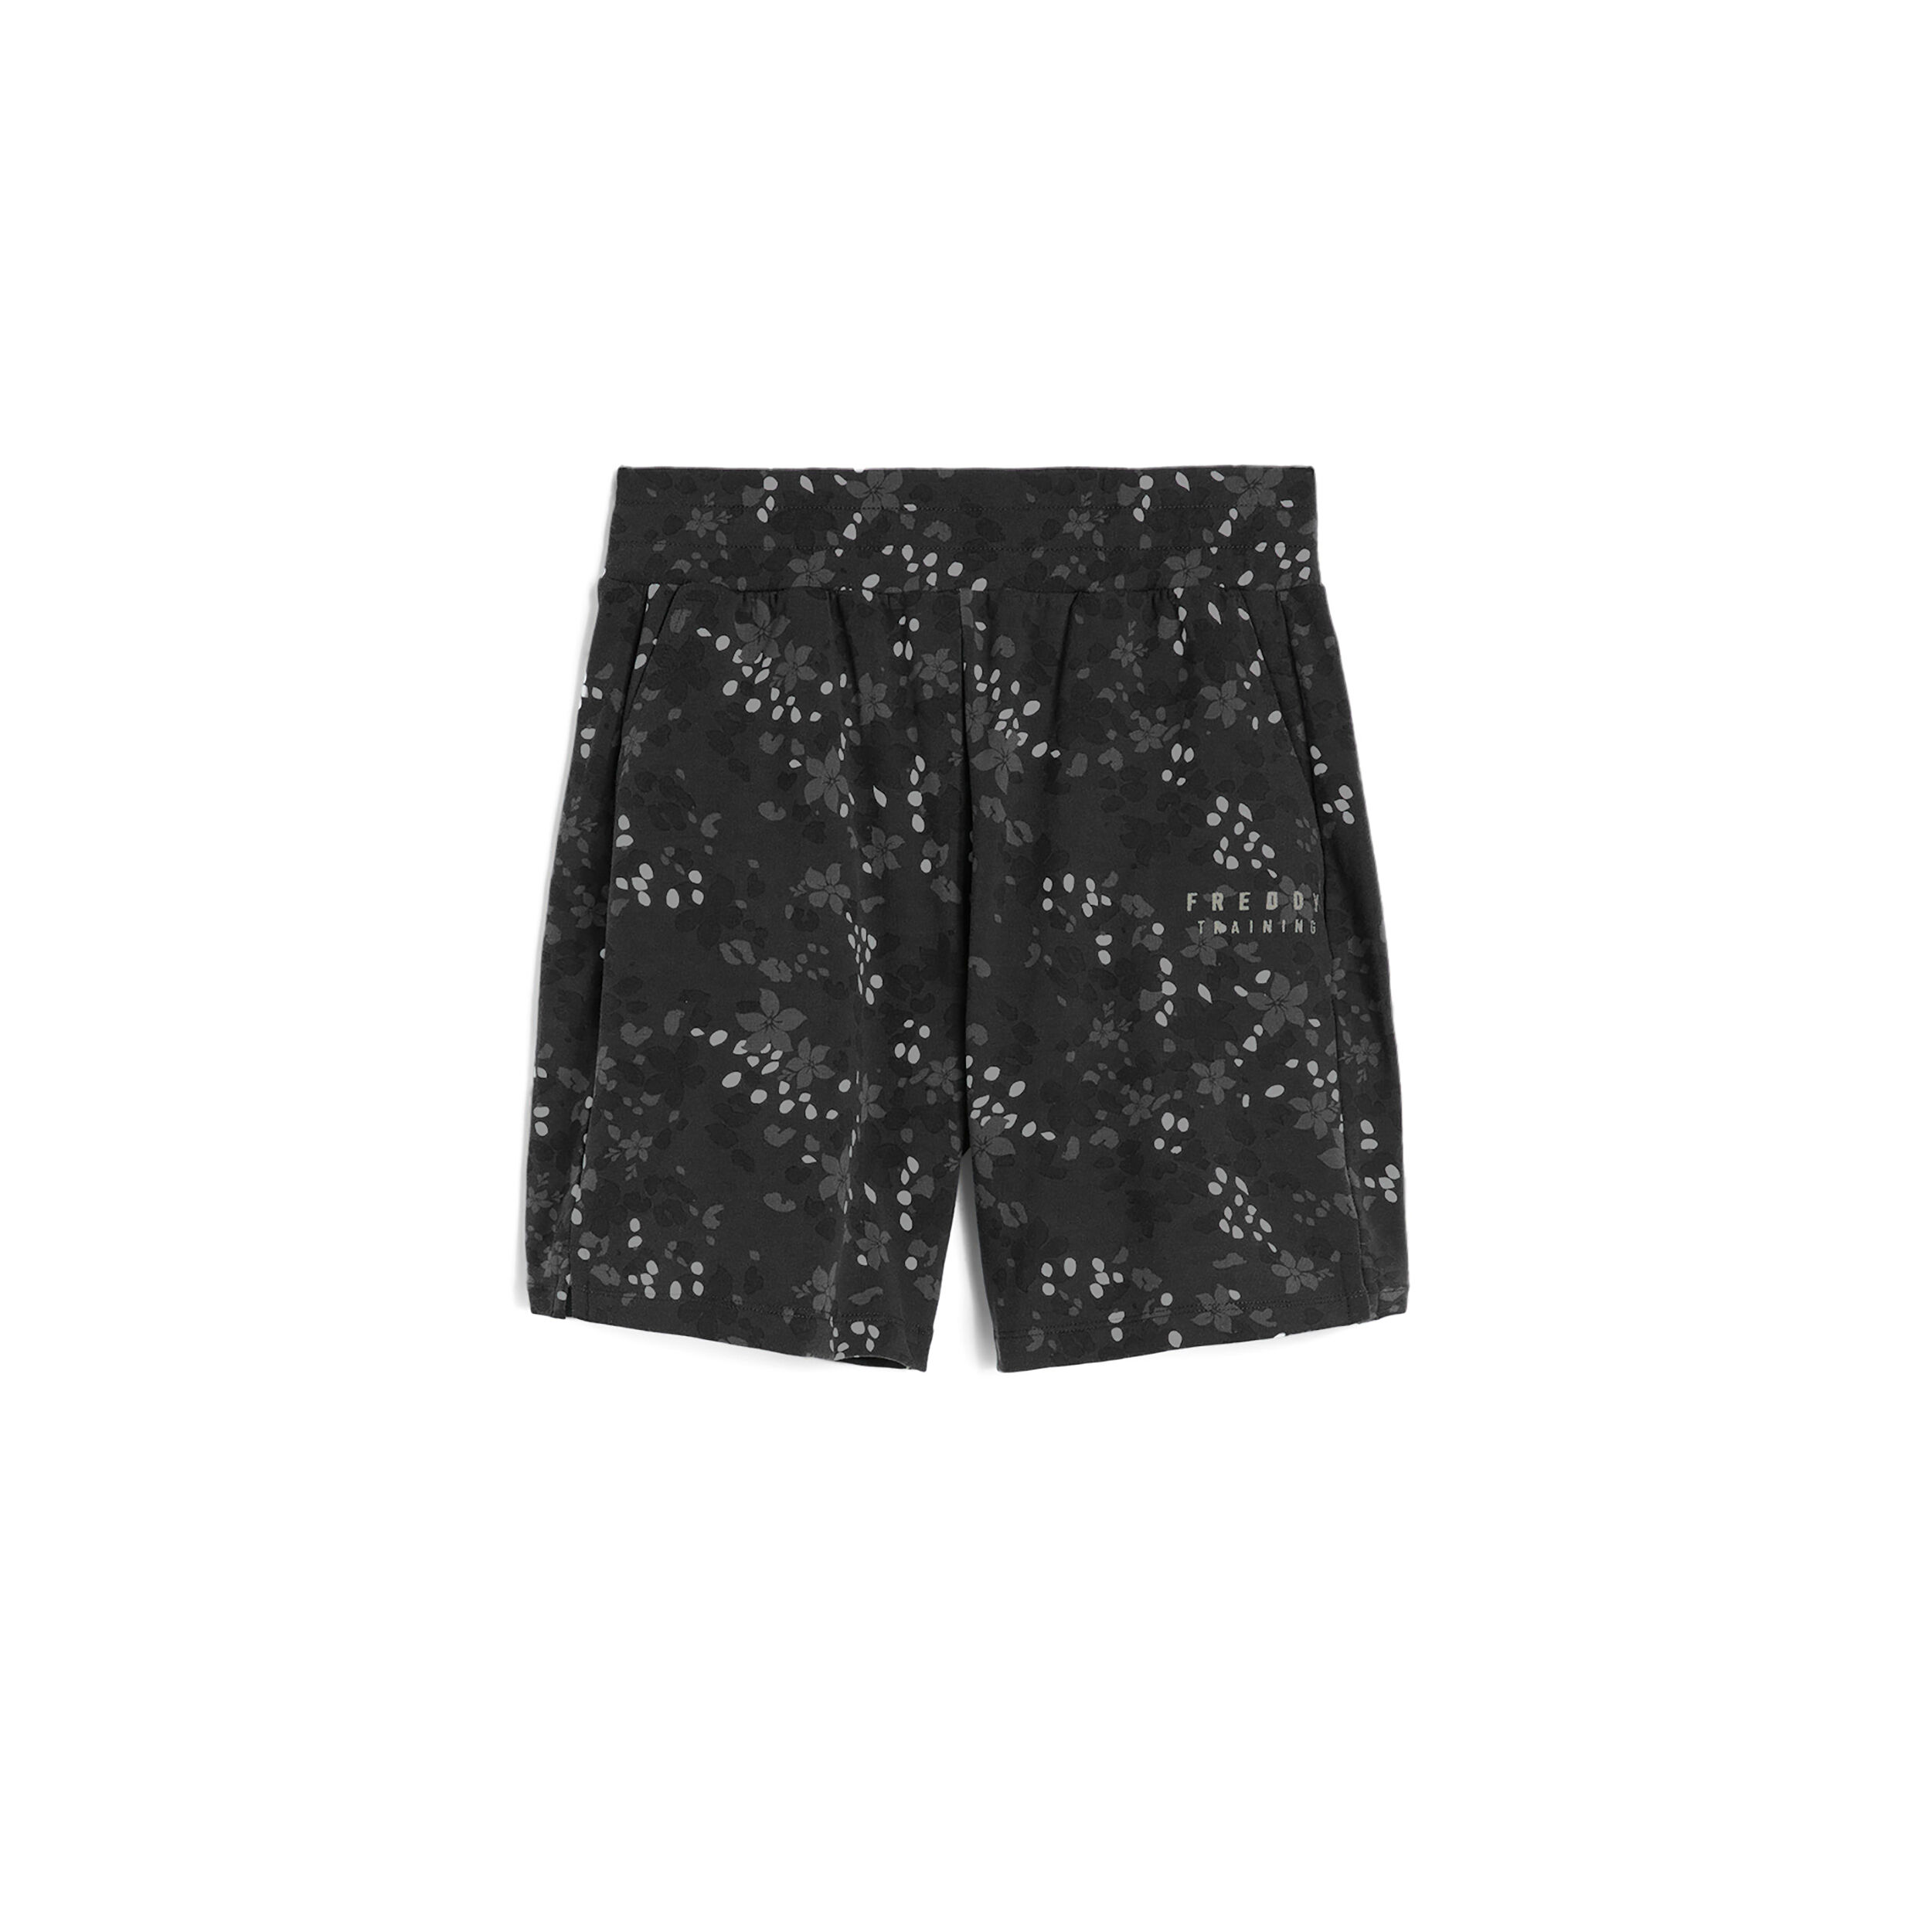 Freddy Pantaloncini donna in heavy jersey stampa floreale allover Black Animal-Flower Allover Donna Small